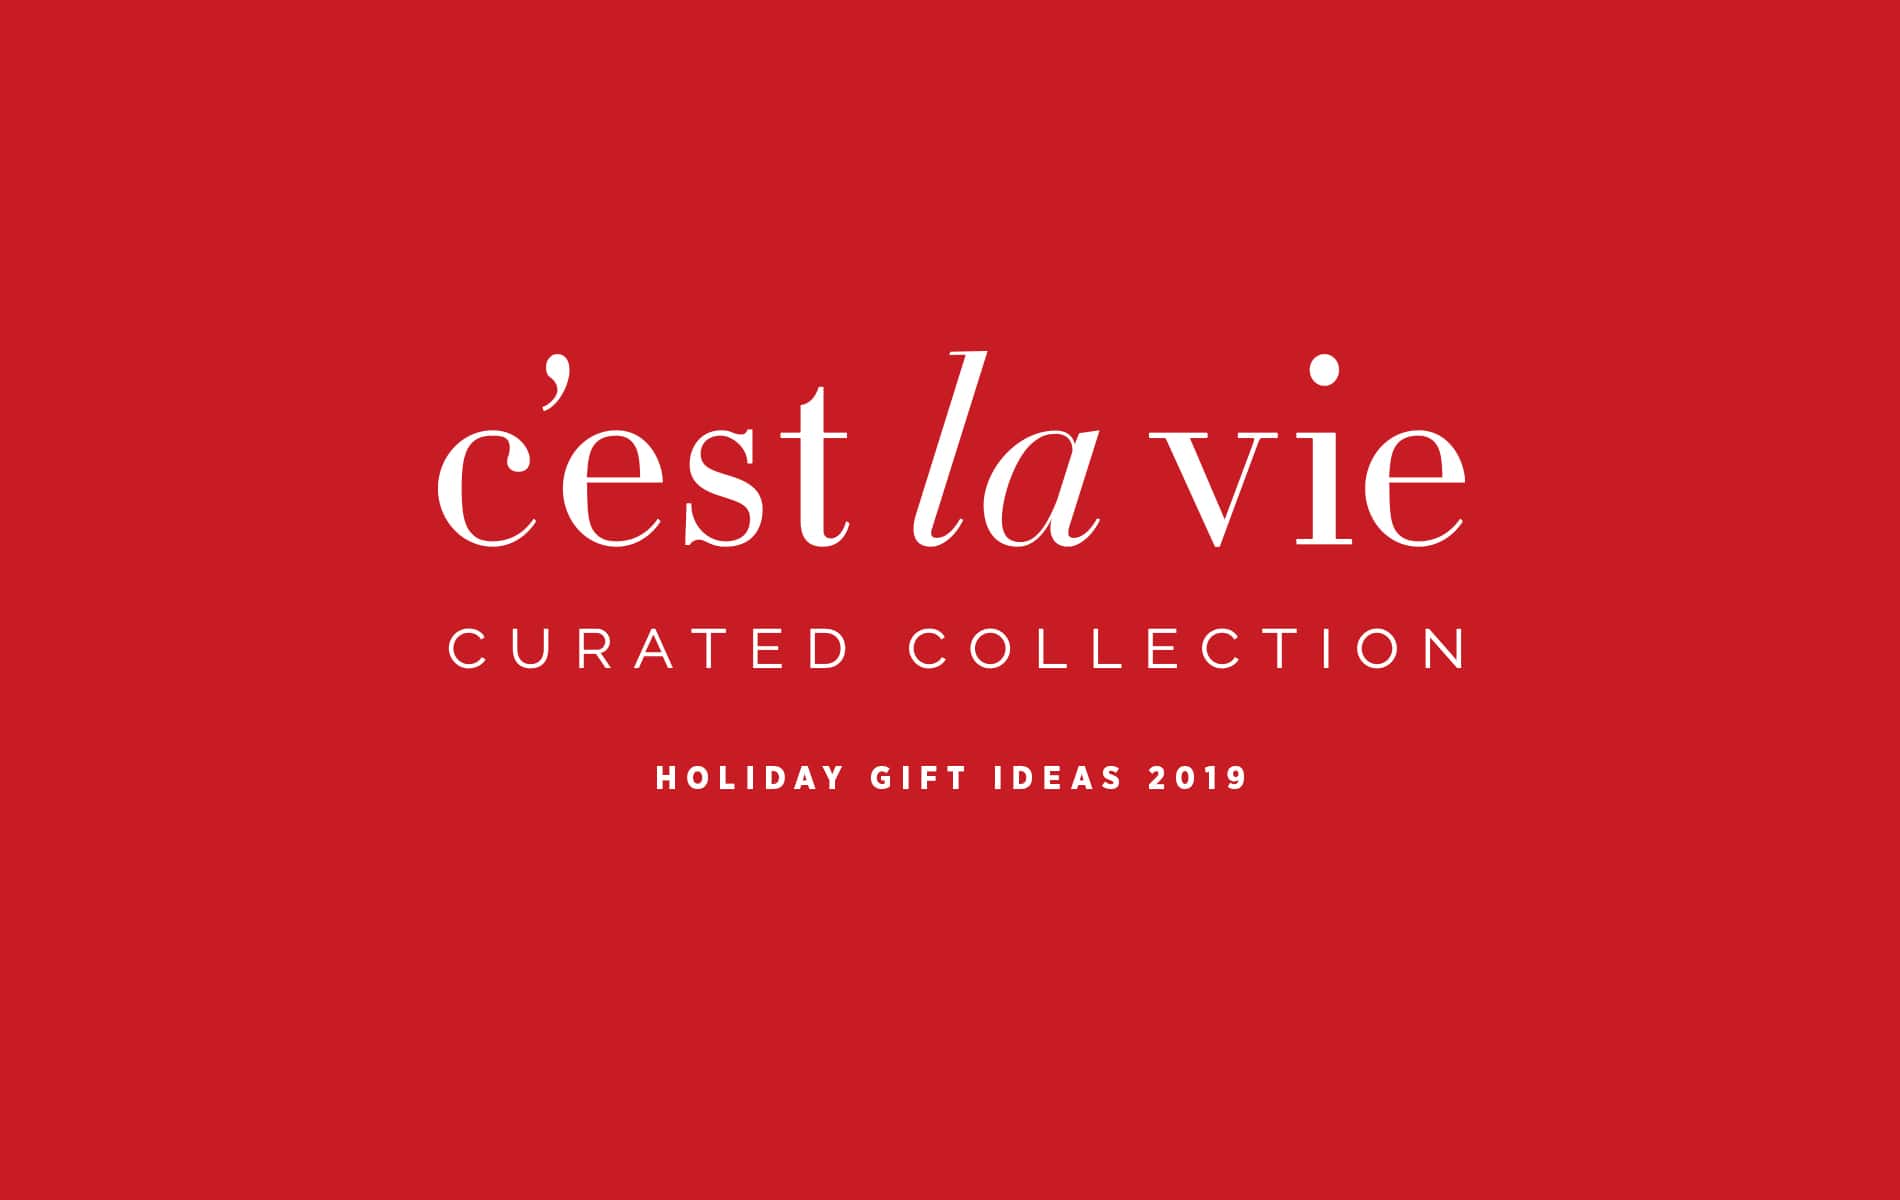 VIE Magazine, C'est la VIE Curated Collection Holiday Gift Guide 2019